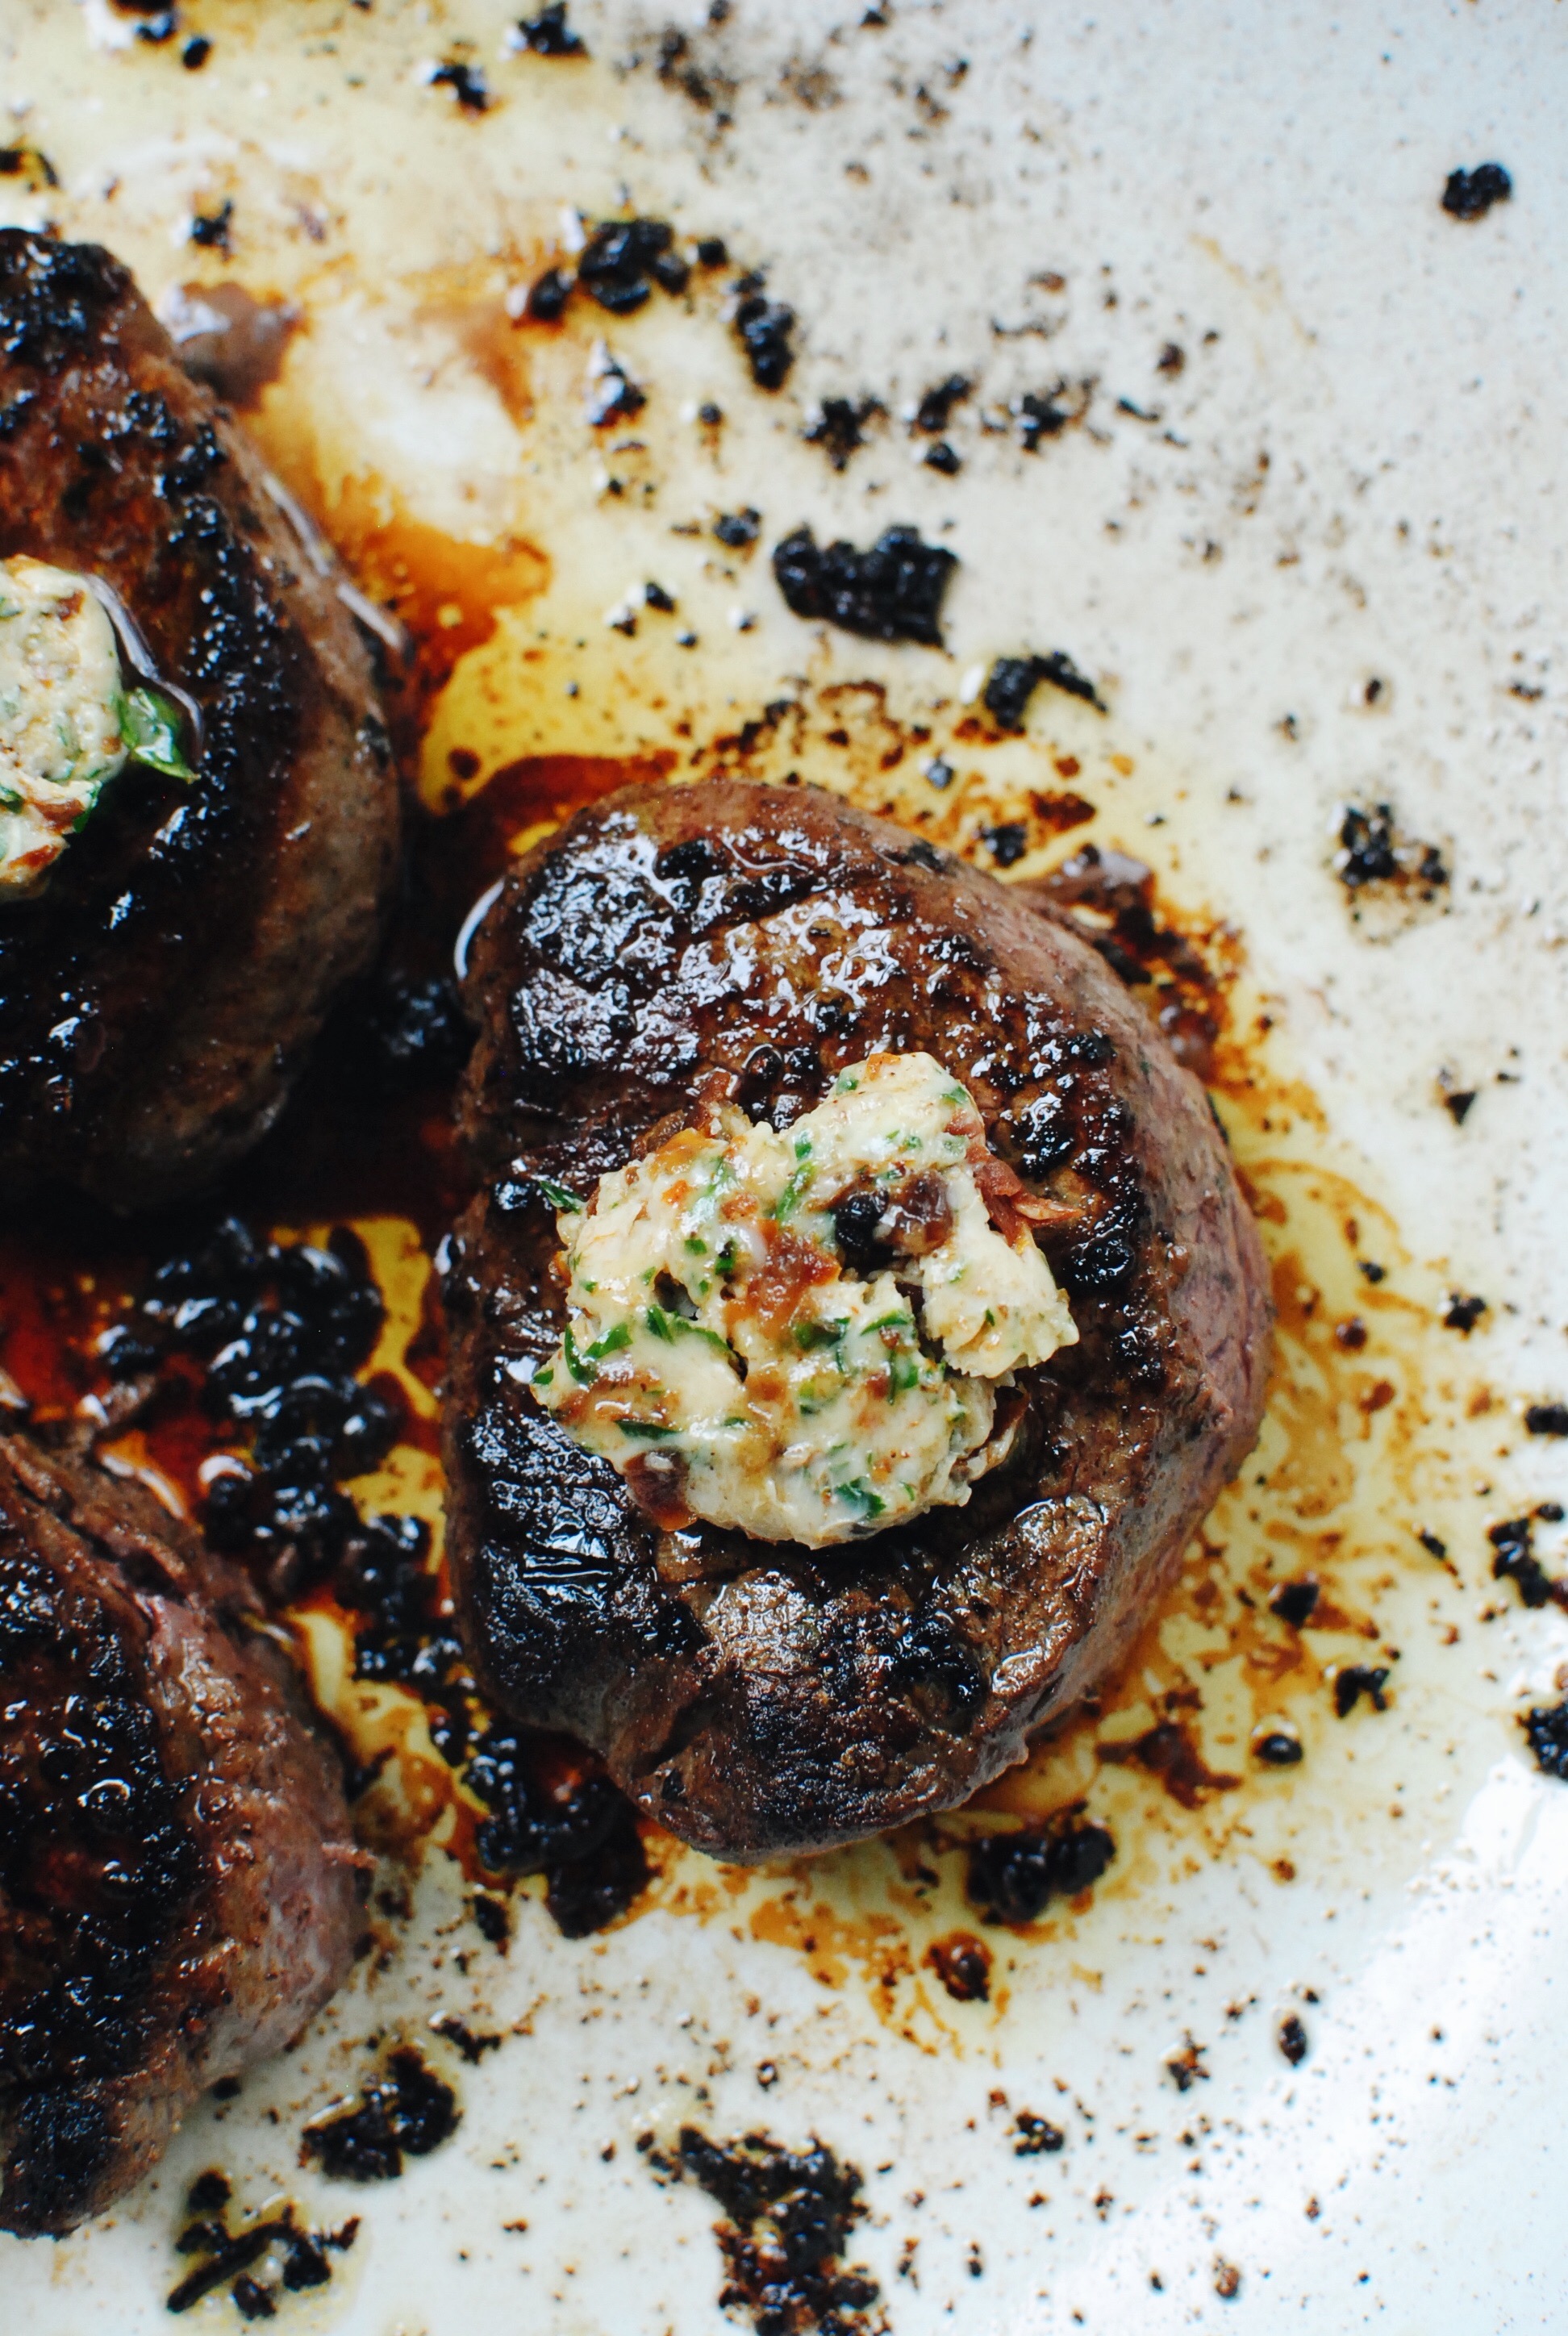 Seared Filet Mignons with a Sun-Dried Tomato Butter / Bev Cooks